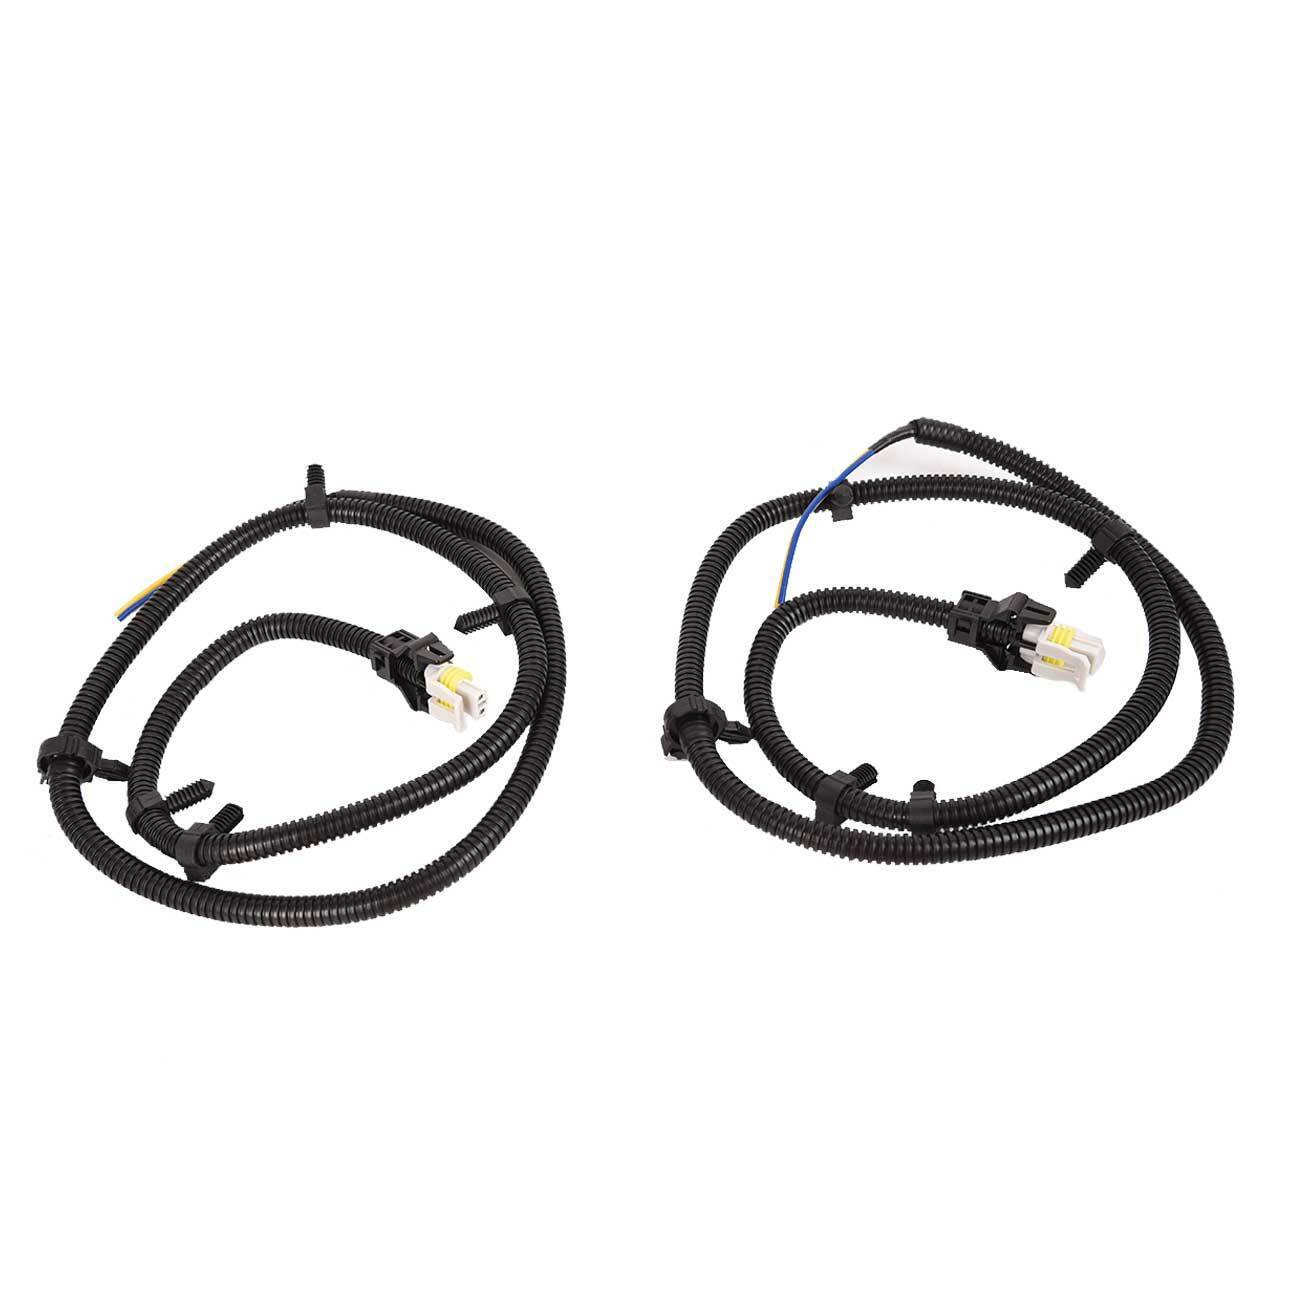 2X ABS Wheel Speed Sensor Wire Harness For Chevrolet Impala Cadillac Monte Carlo